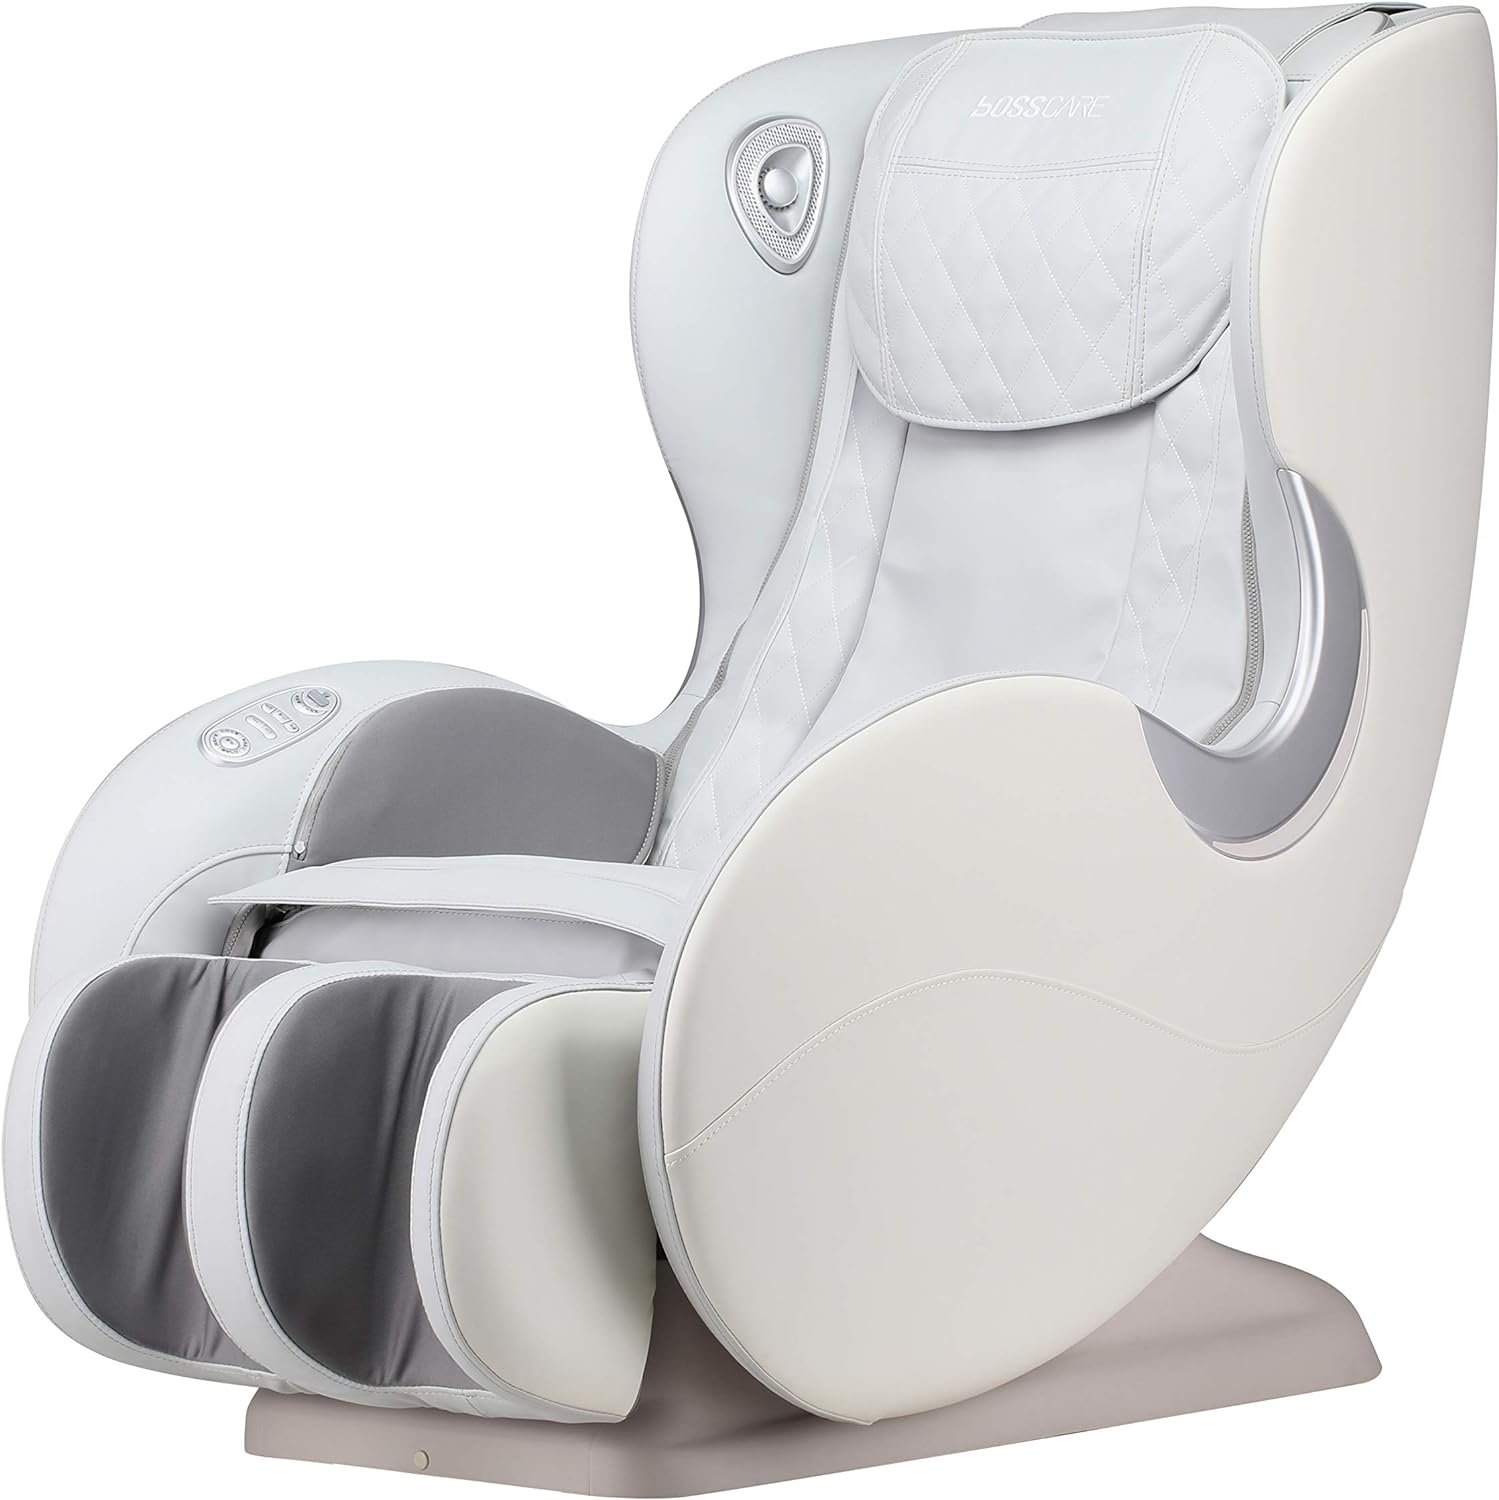 BOSSCARE Small Massage Chair Review